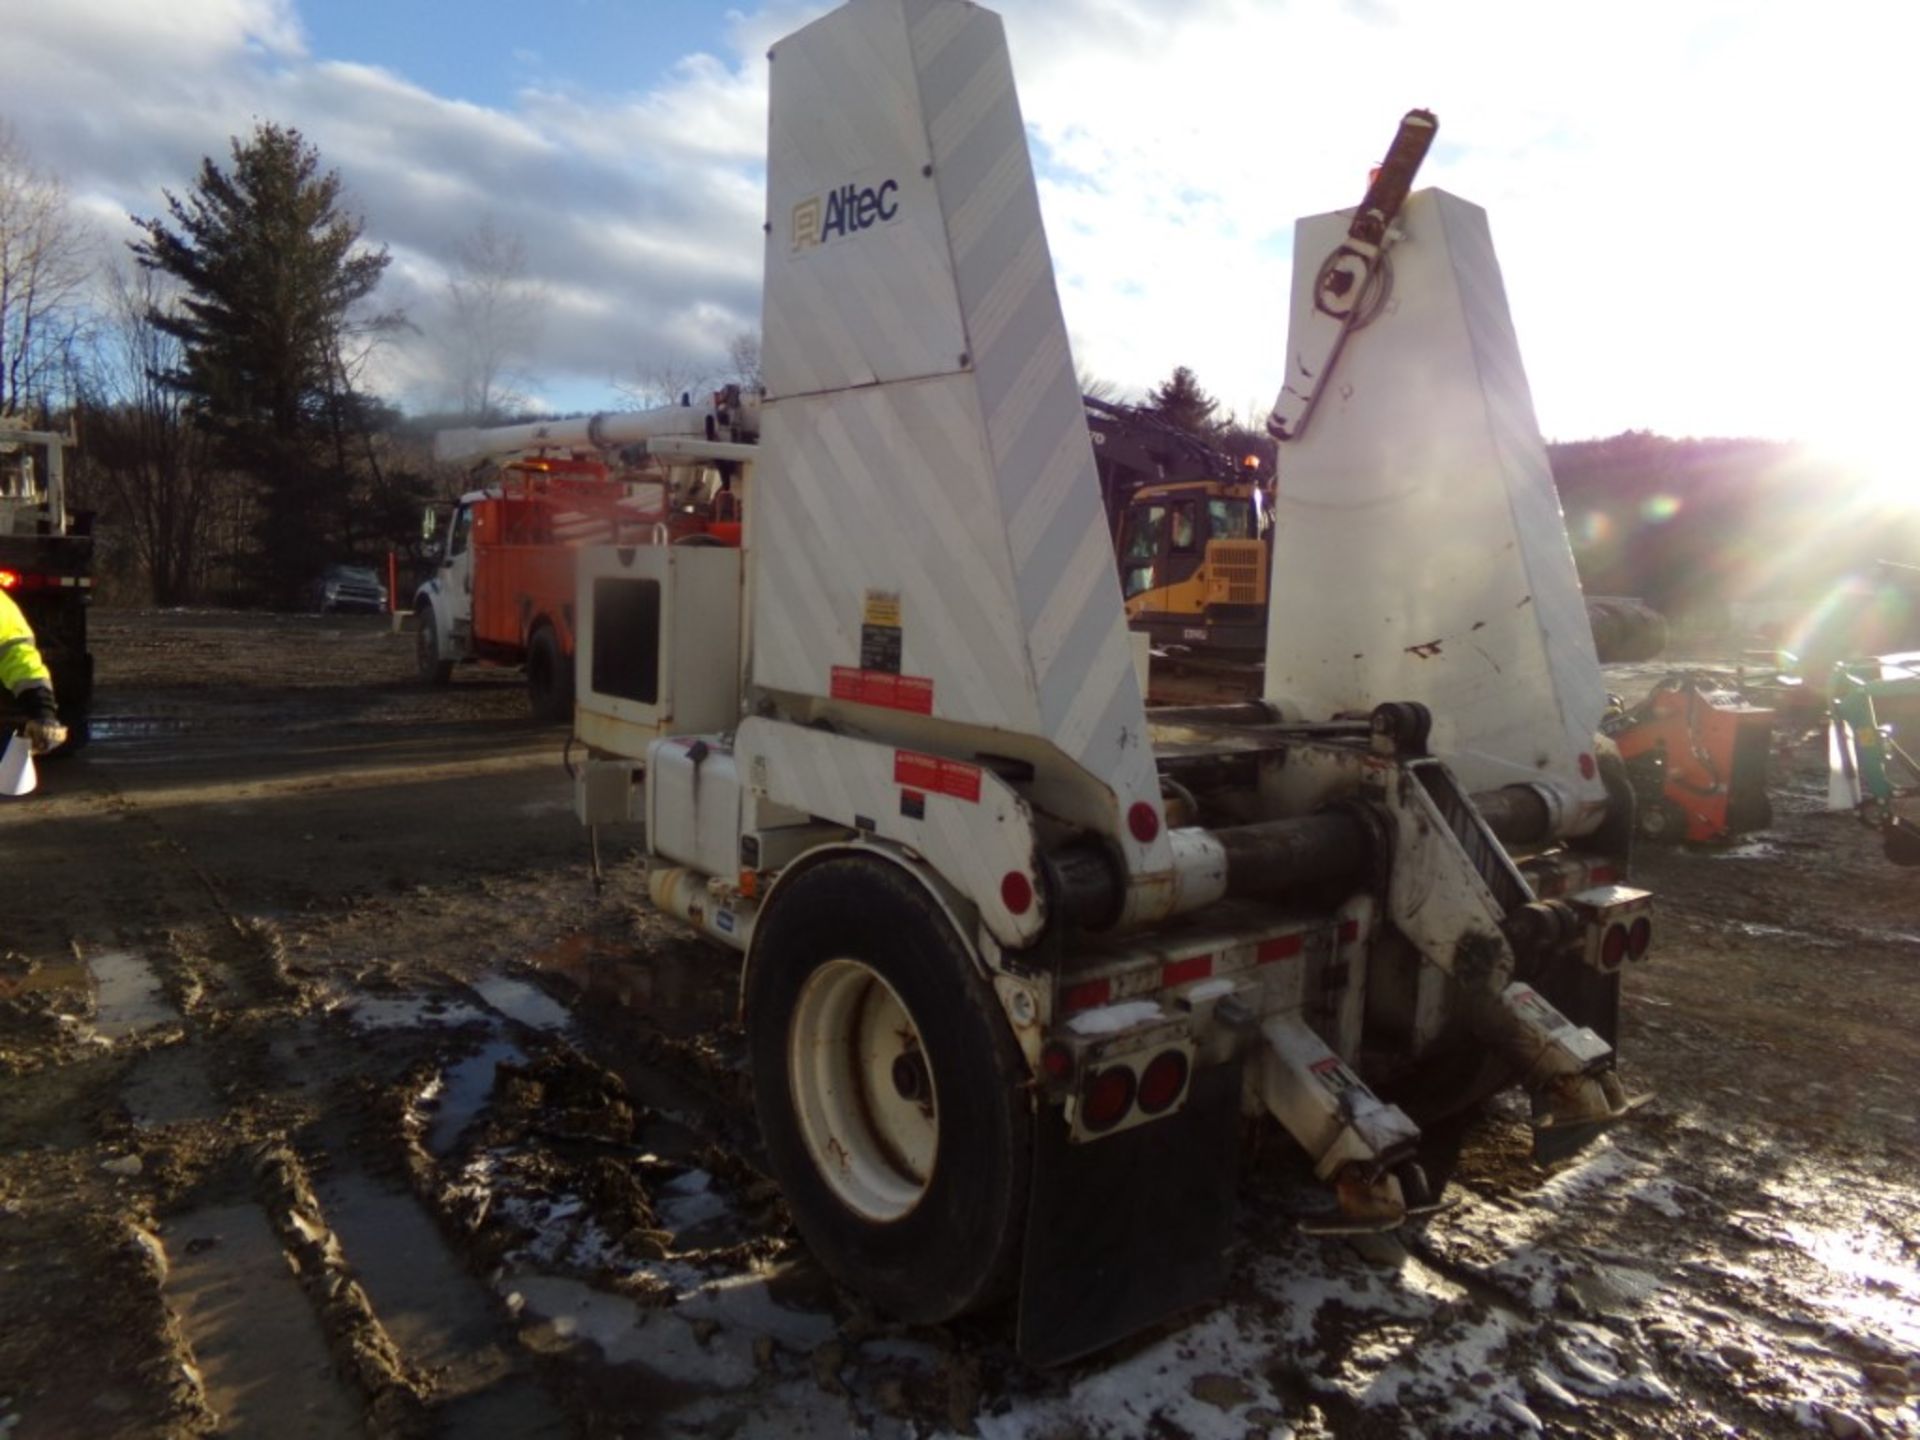 2007 Altec AD-108 Spool Trailer, With Diesel Engine, Pintle Hitch, Air Brakes, Single Axle, Vin #: - Image 2 of 4